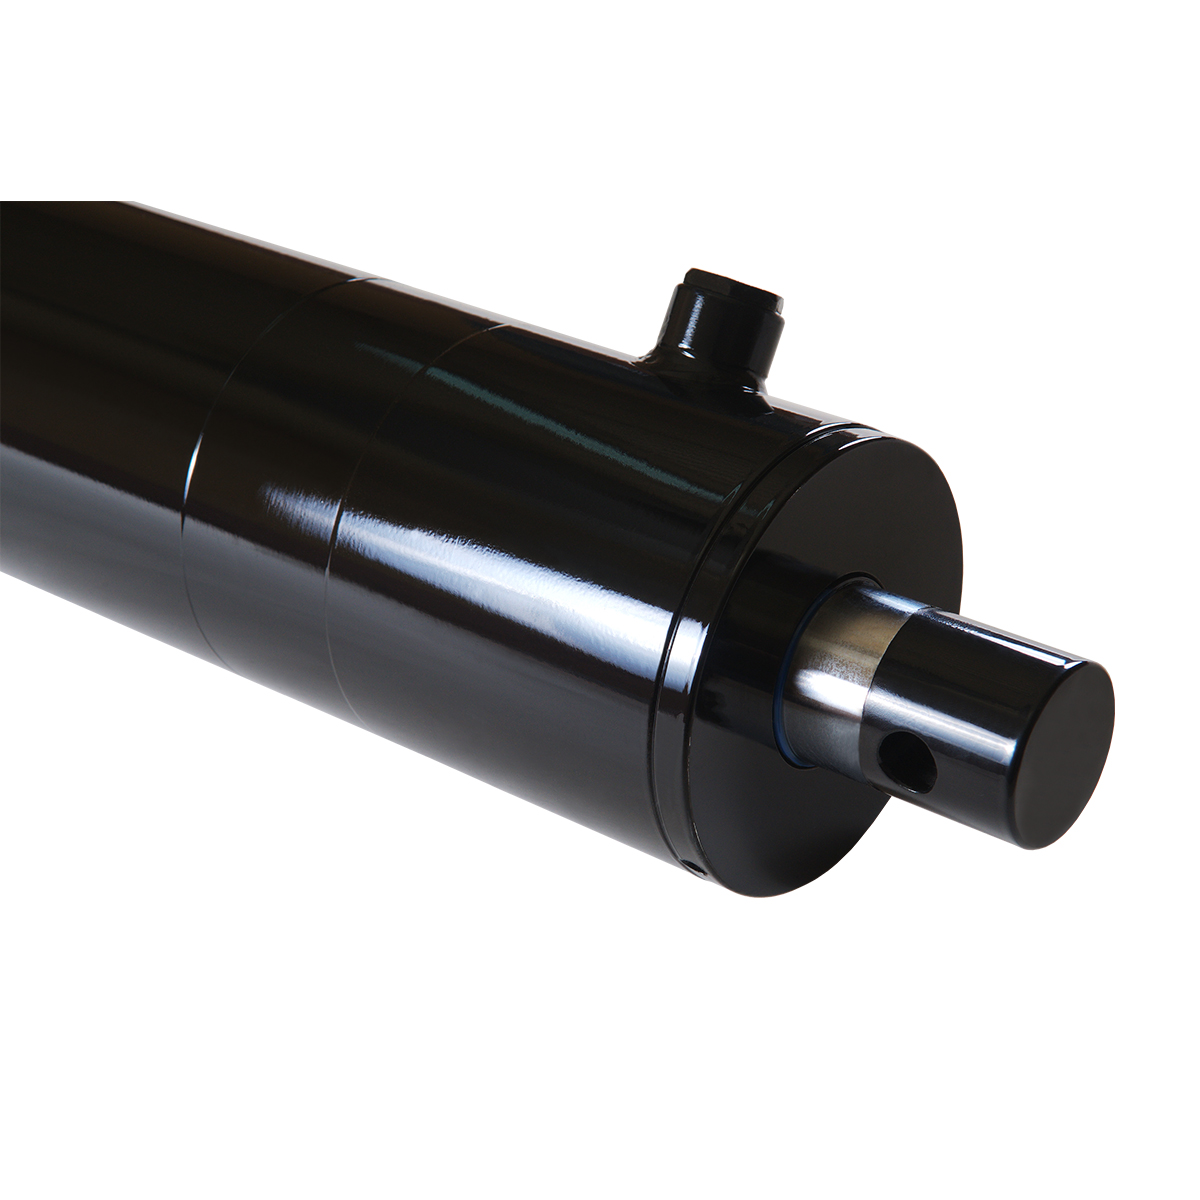 4 bore x 30 stroke hydraulic cylinder, log splitter double acting cylinder | Magister Hydraulics